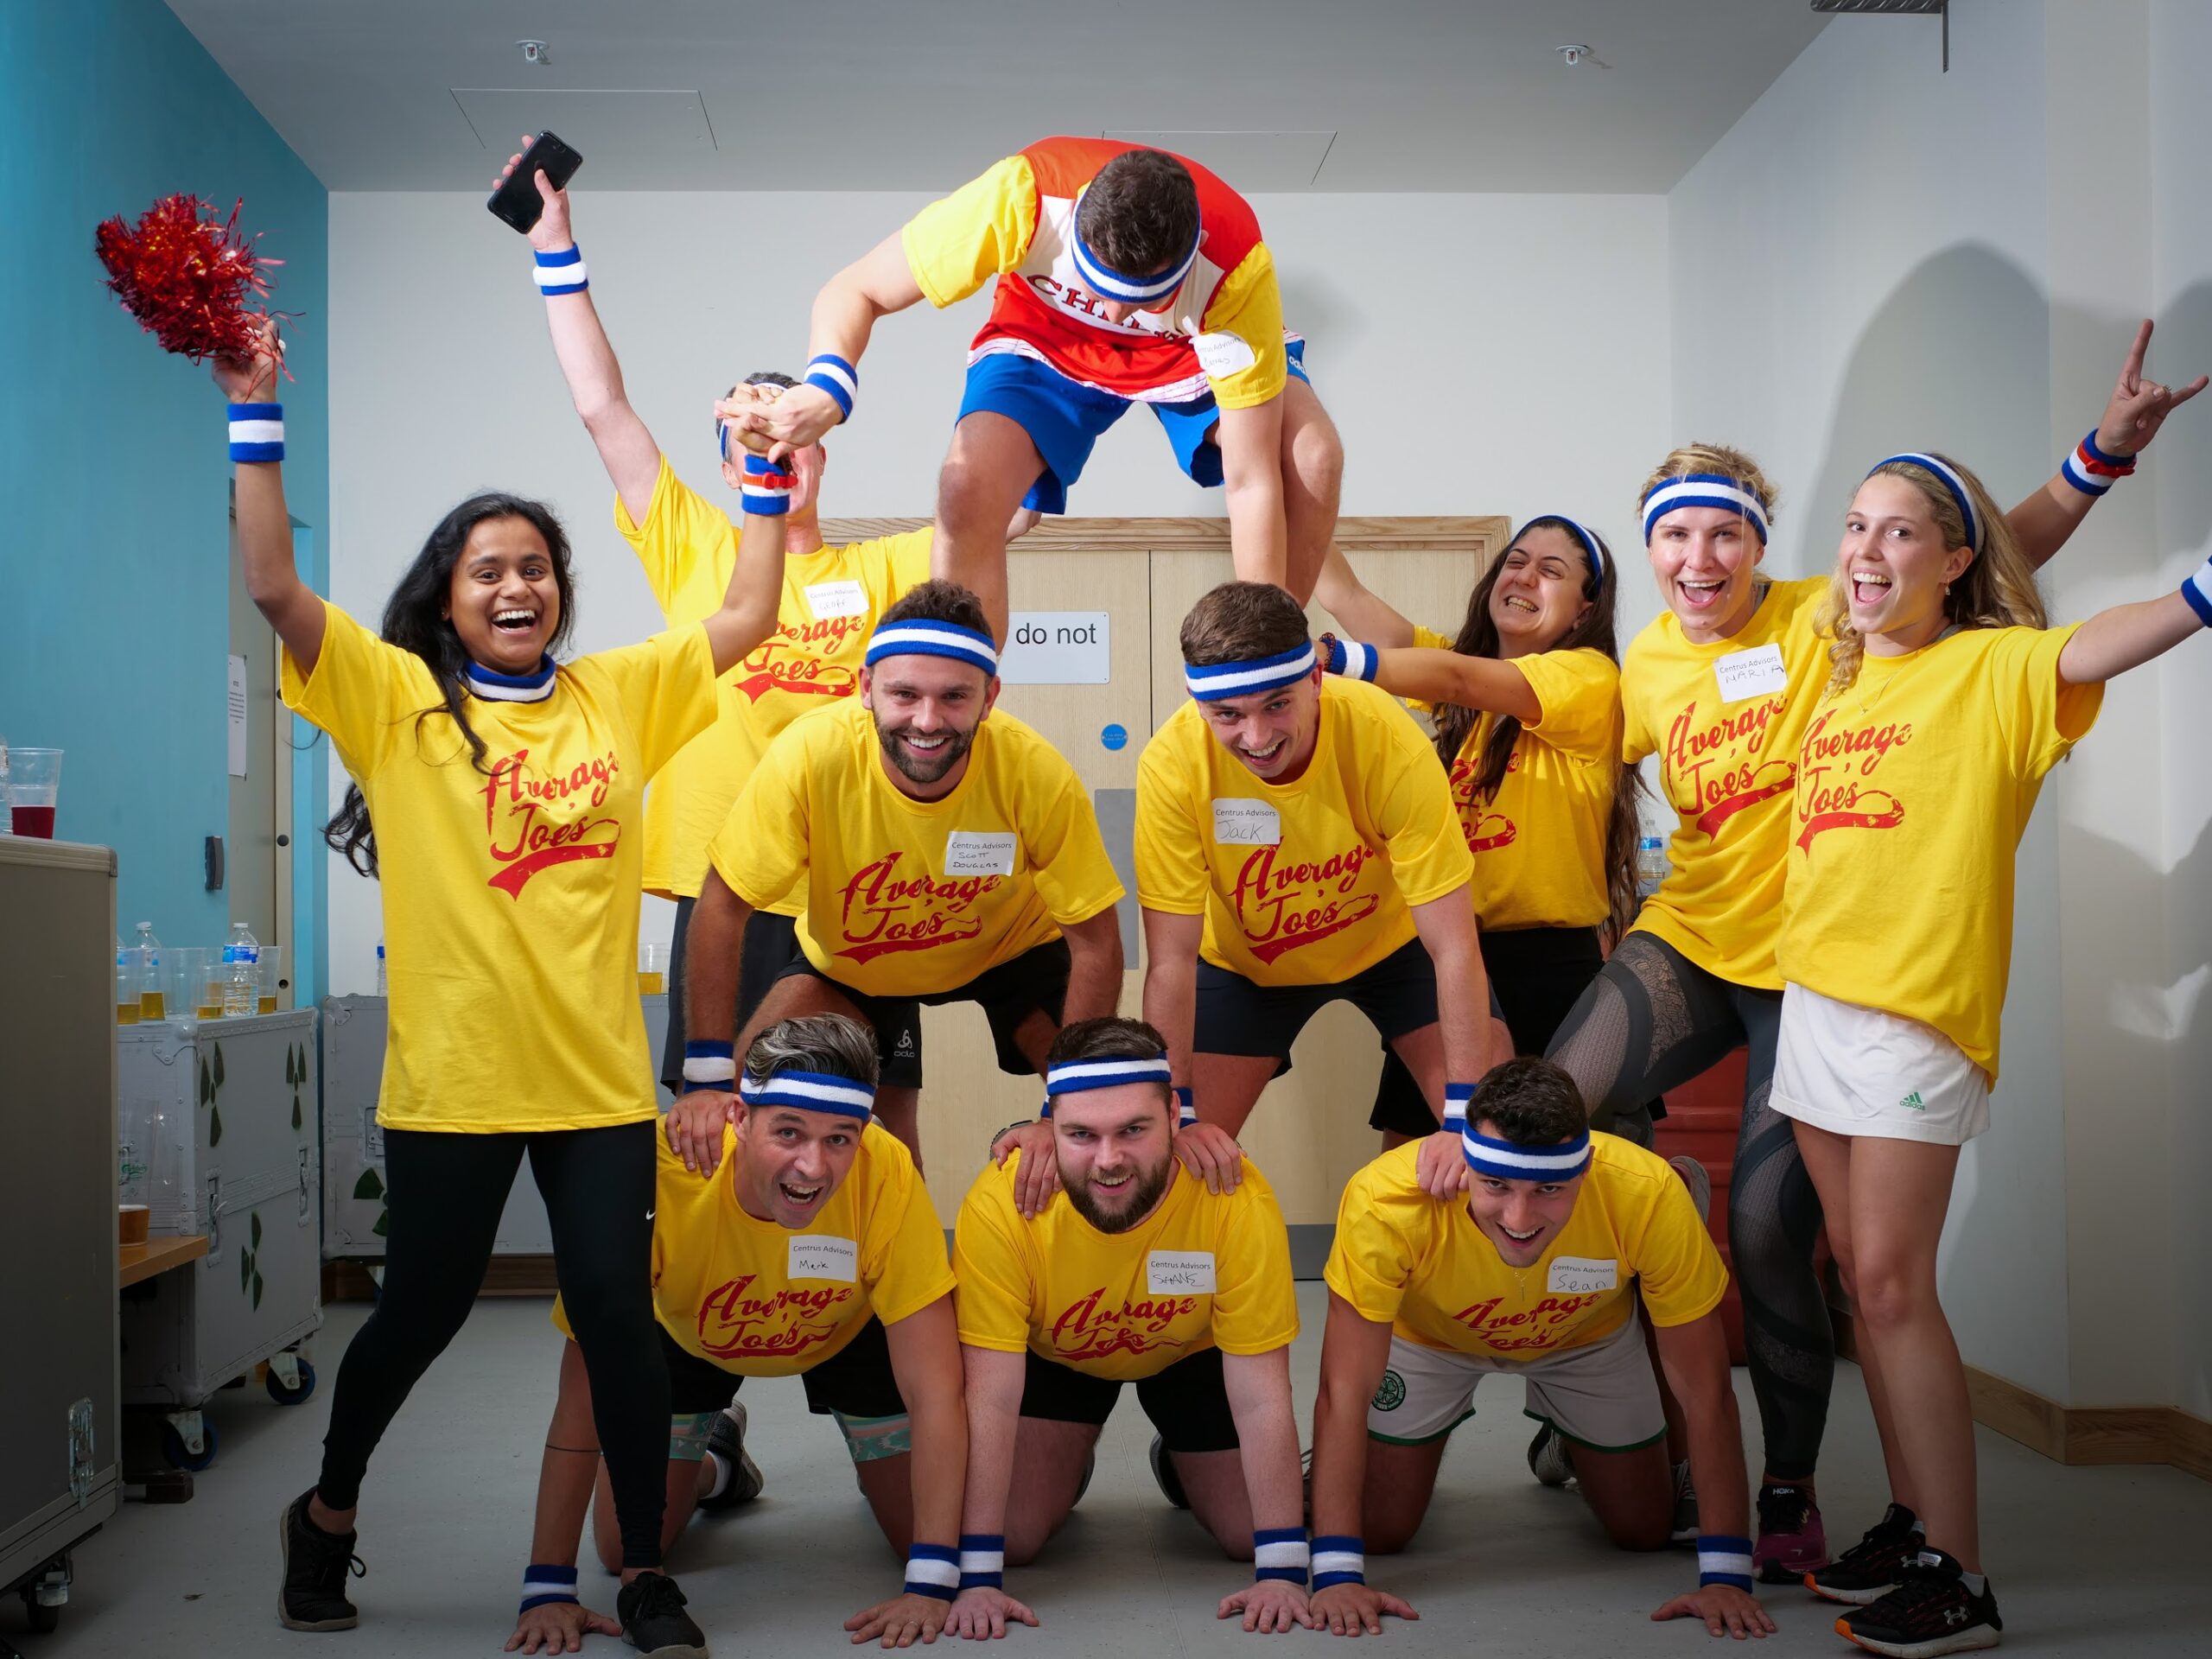 Centrus ‘Average Joes’ at InfraRed’s charity dodgeball tournament